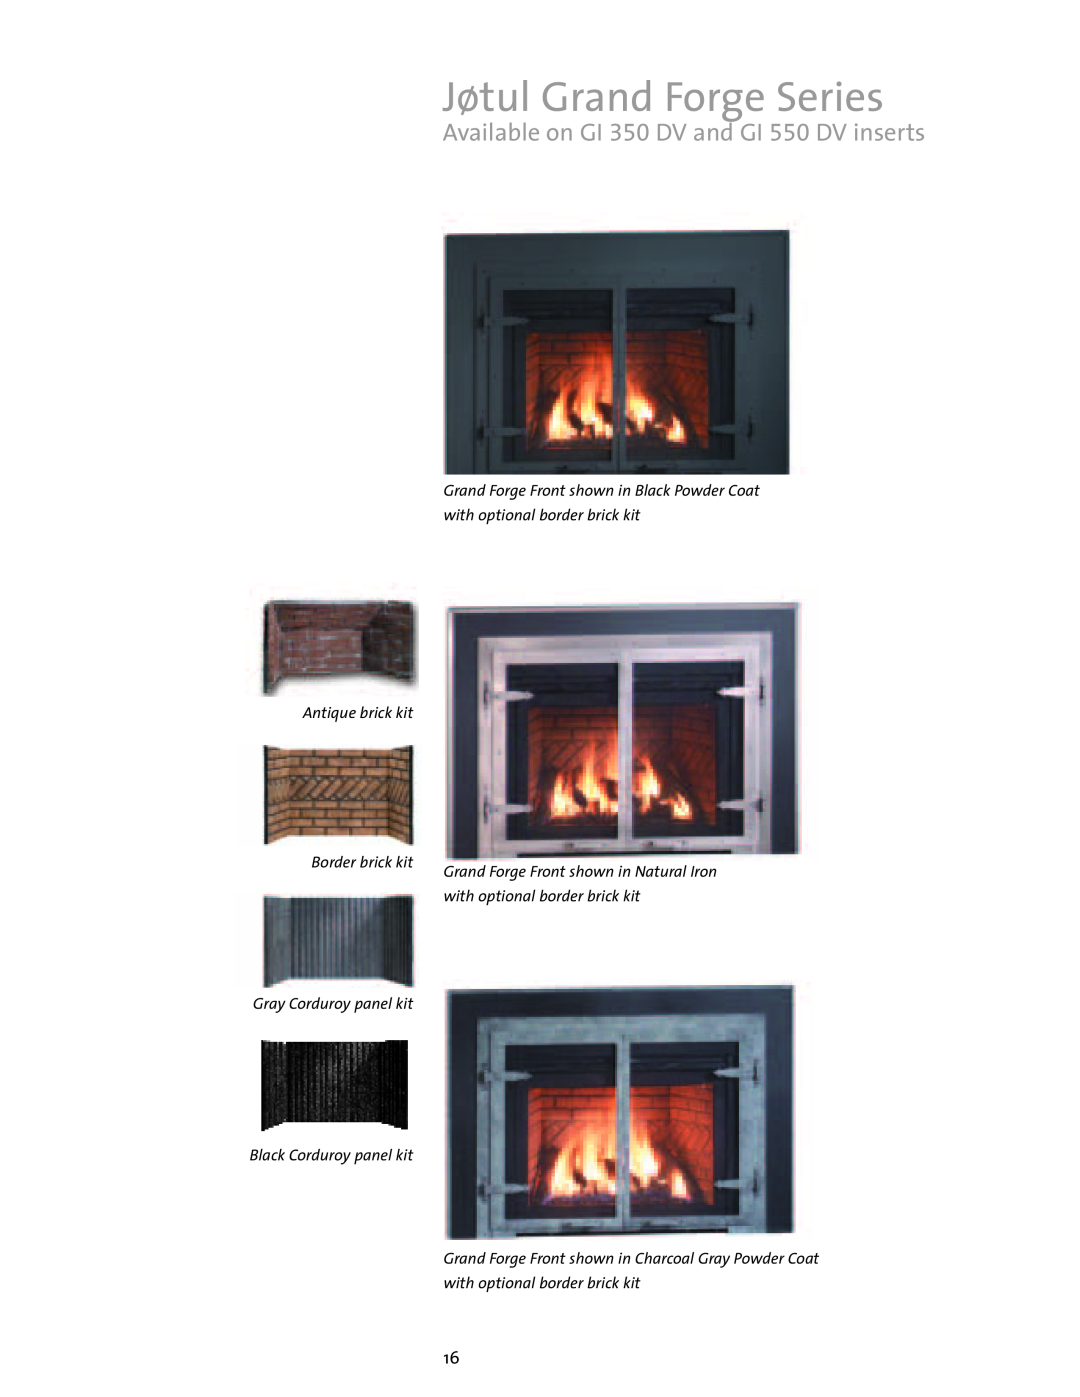 Jotul Gas Inserts and Fireplaces brochure Jøtul Grand Forge Series, Available on GI 350 DV and GI 550 DV inserts 